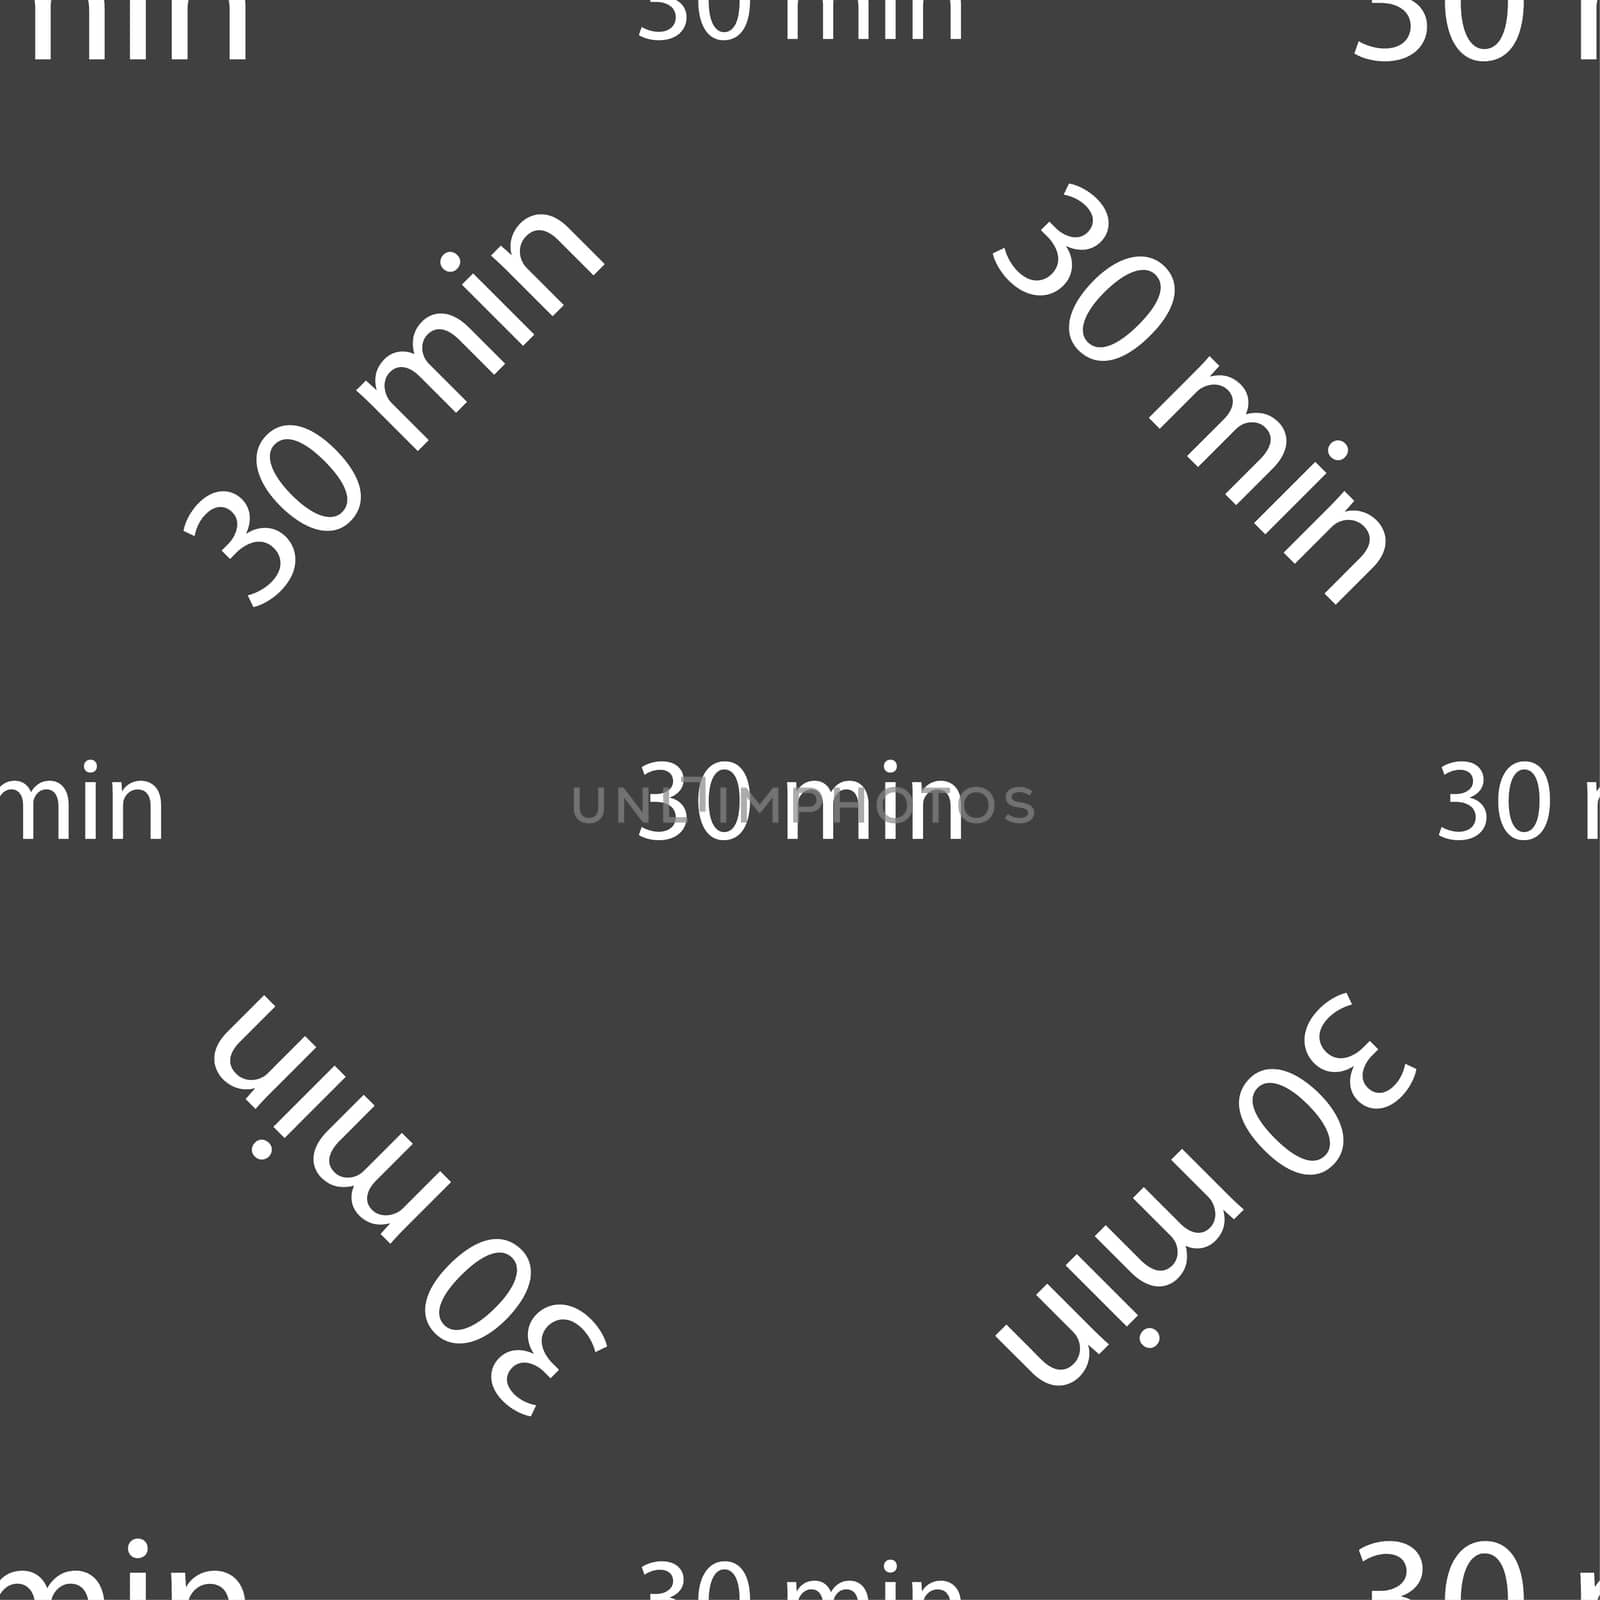 30 minutes sign icon. Seamless pattern on a gray background. illustration